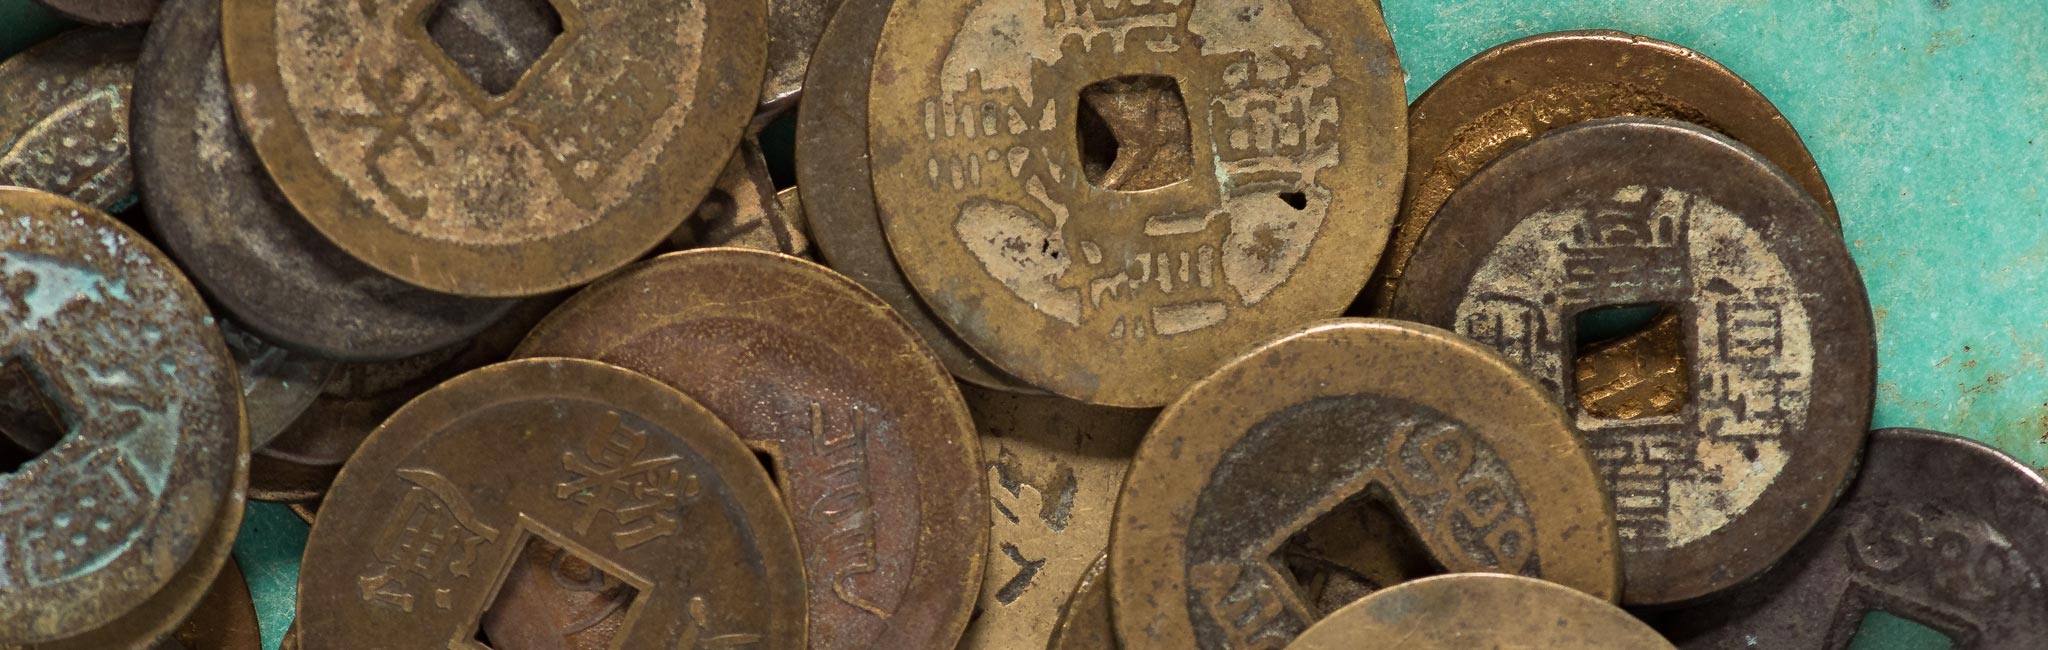 Closeup image of Chinese coins on pottery